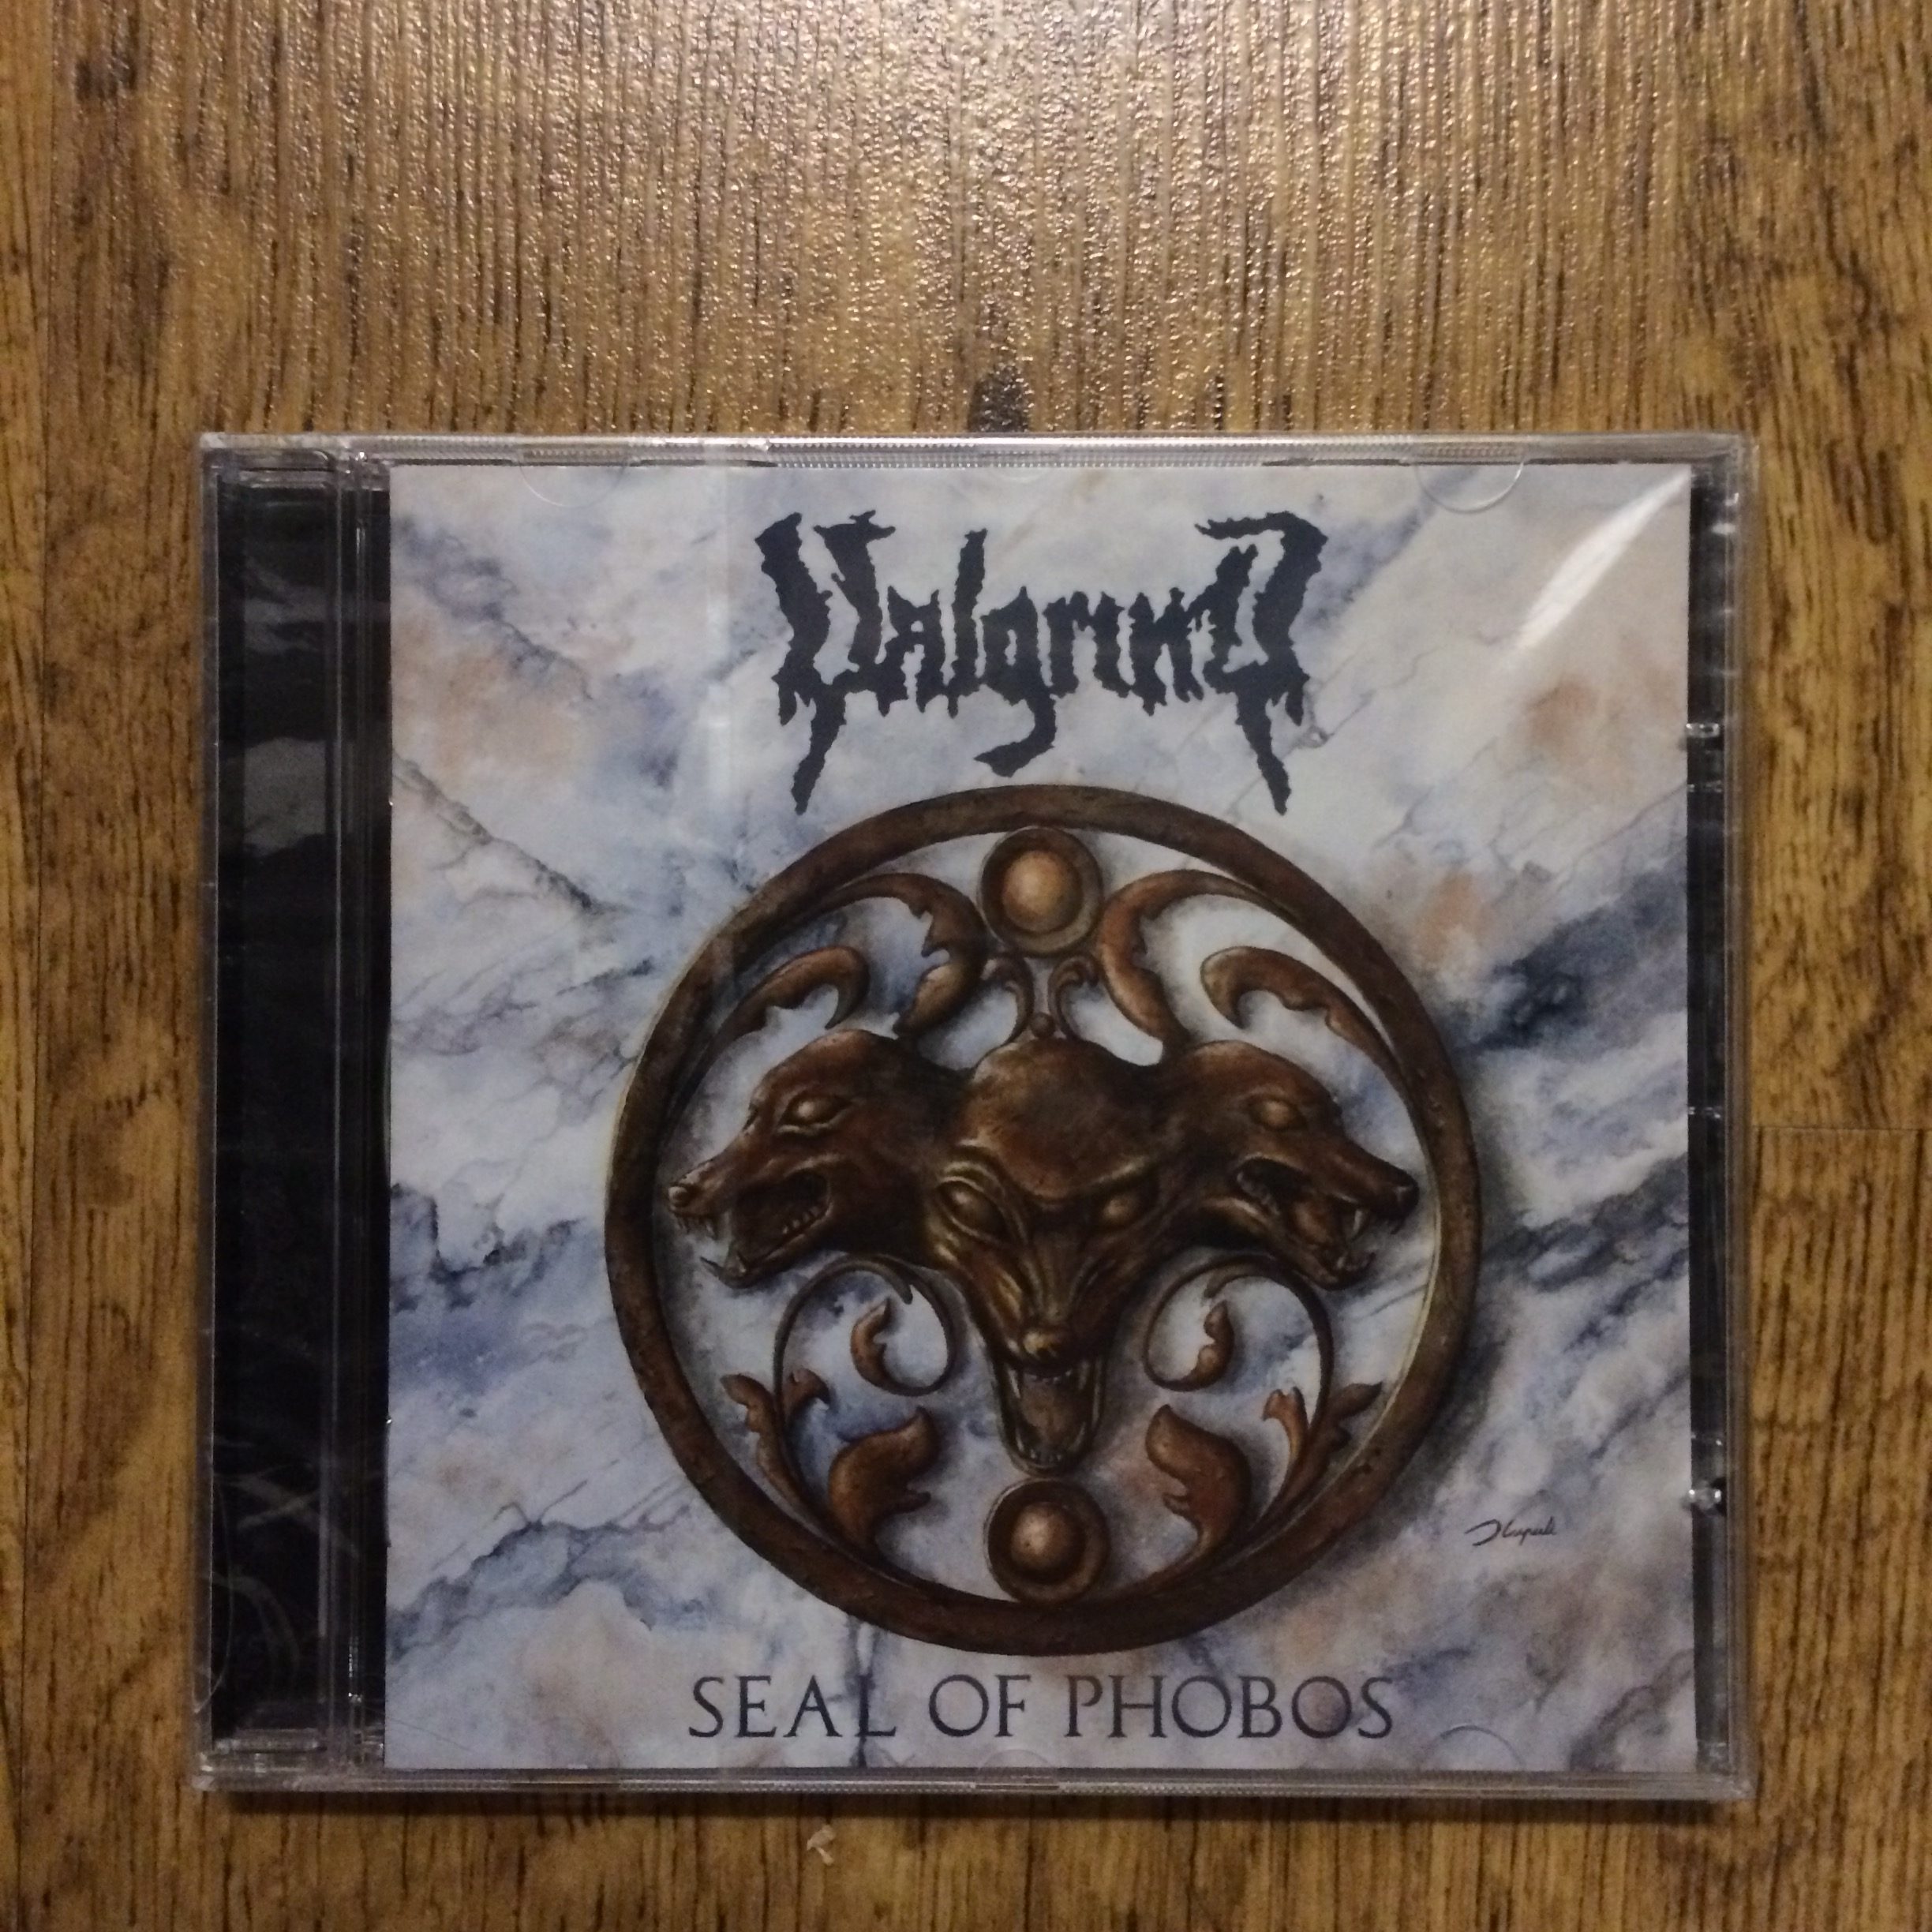 Photo of the Valgrind - "Seal of Phobos" CD